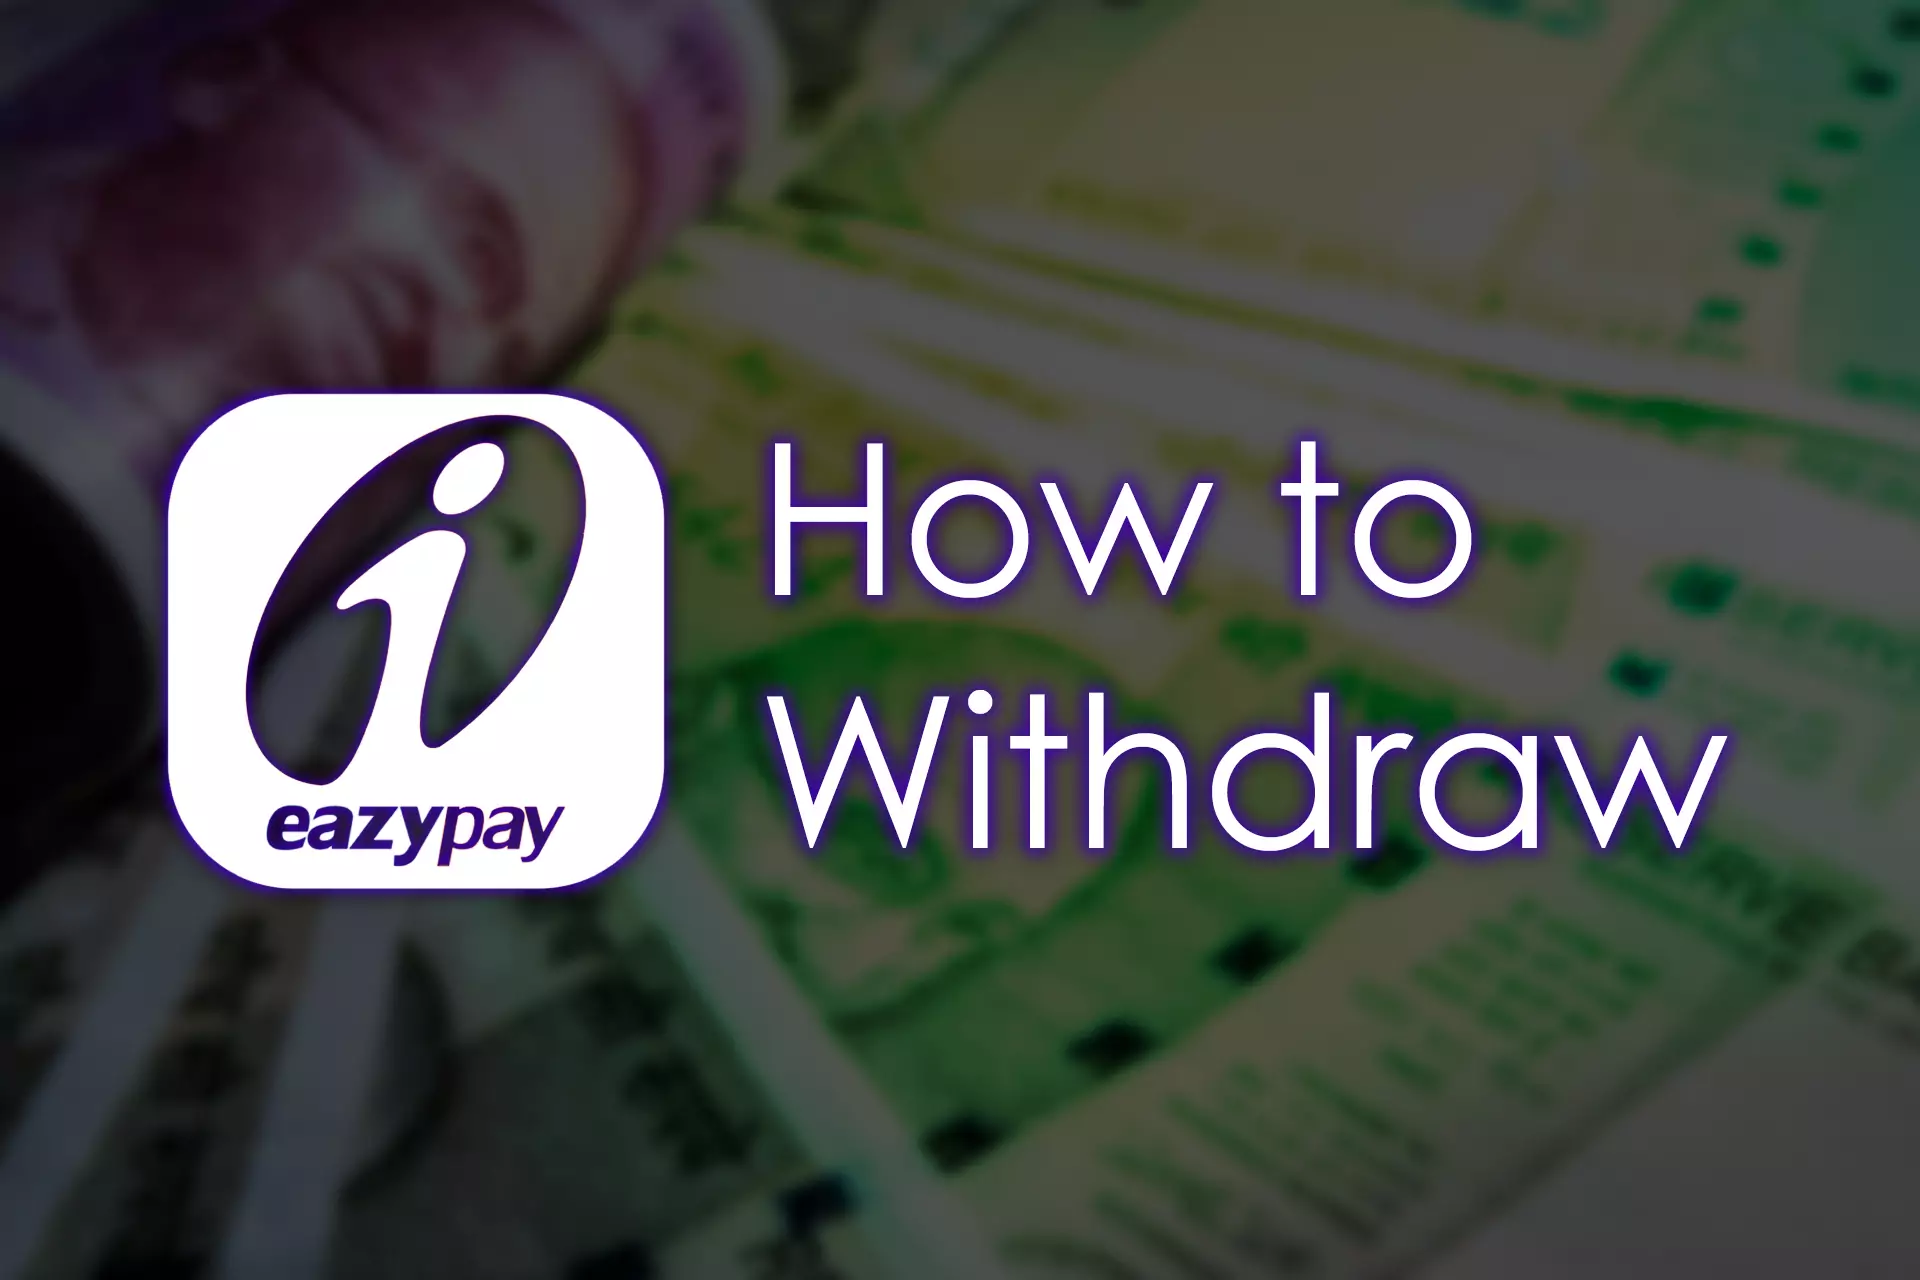 To withdraw money from the gambling account you need to find the Eazypay icon at a cashier.